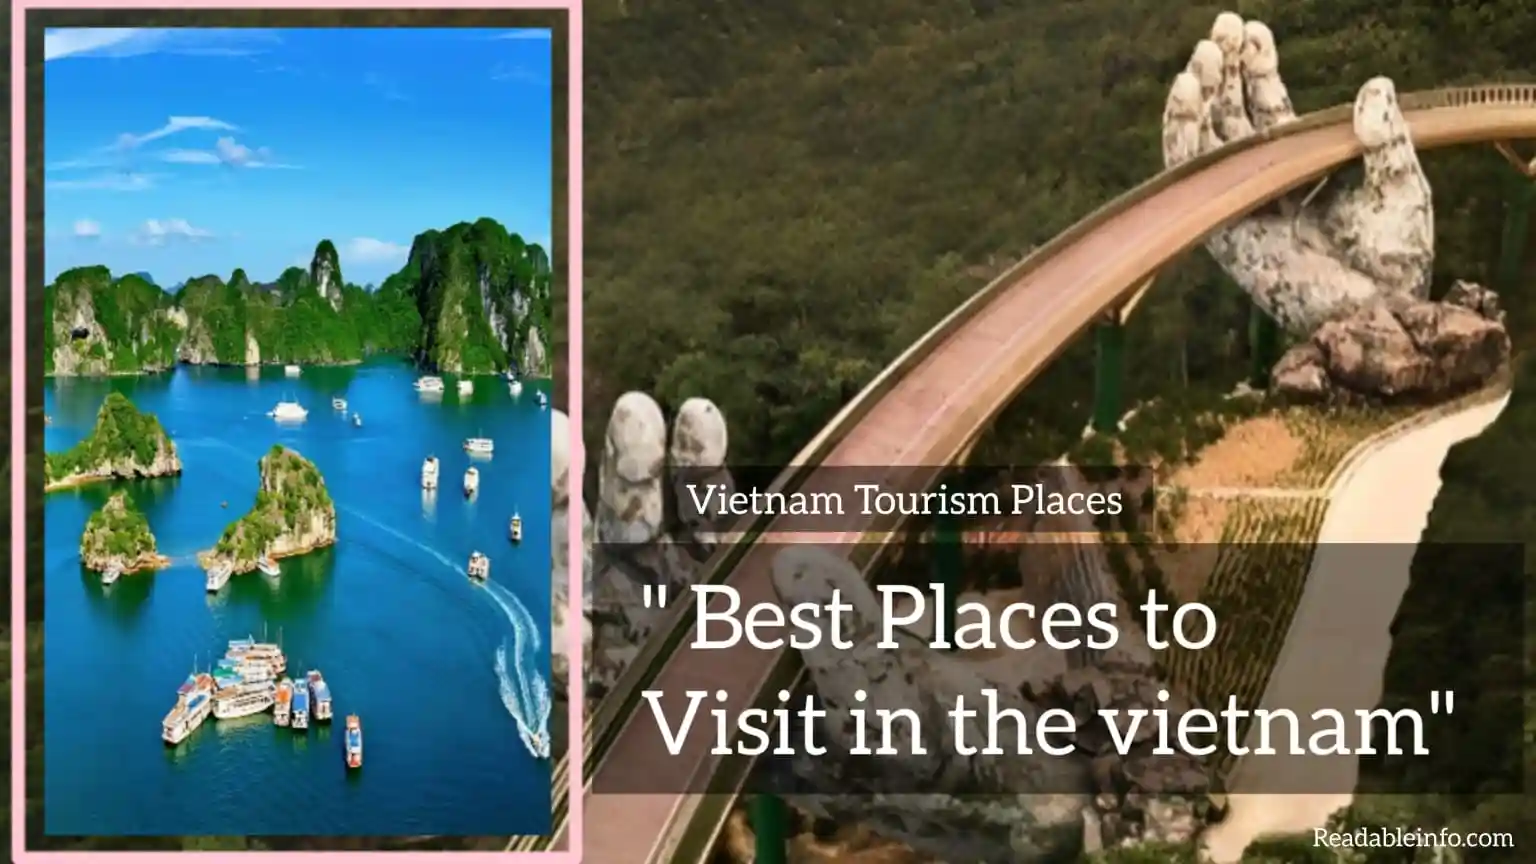 You are currently viewing Best Places To Visit in Vietnam (Vietnam Tourism Places)